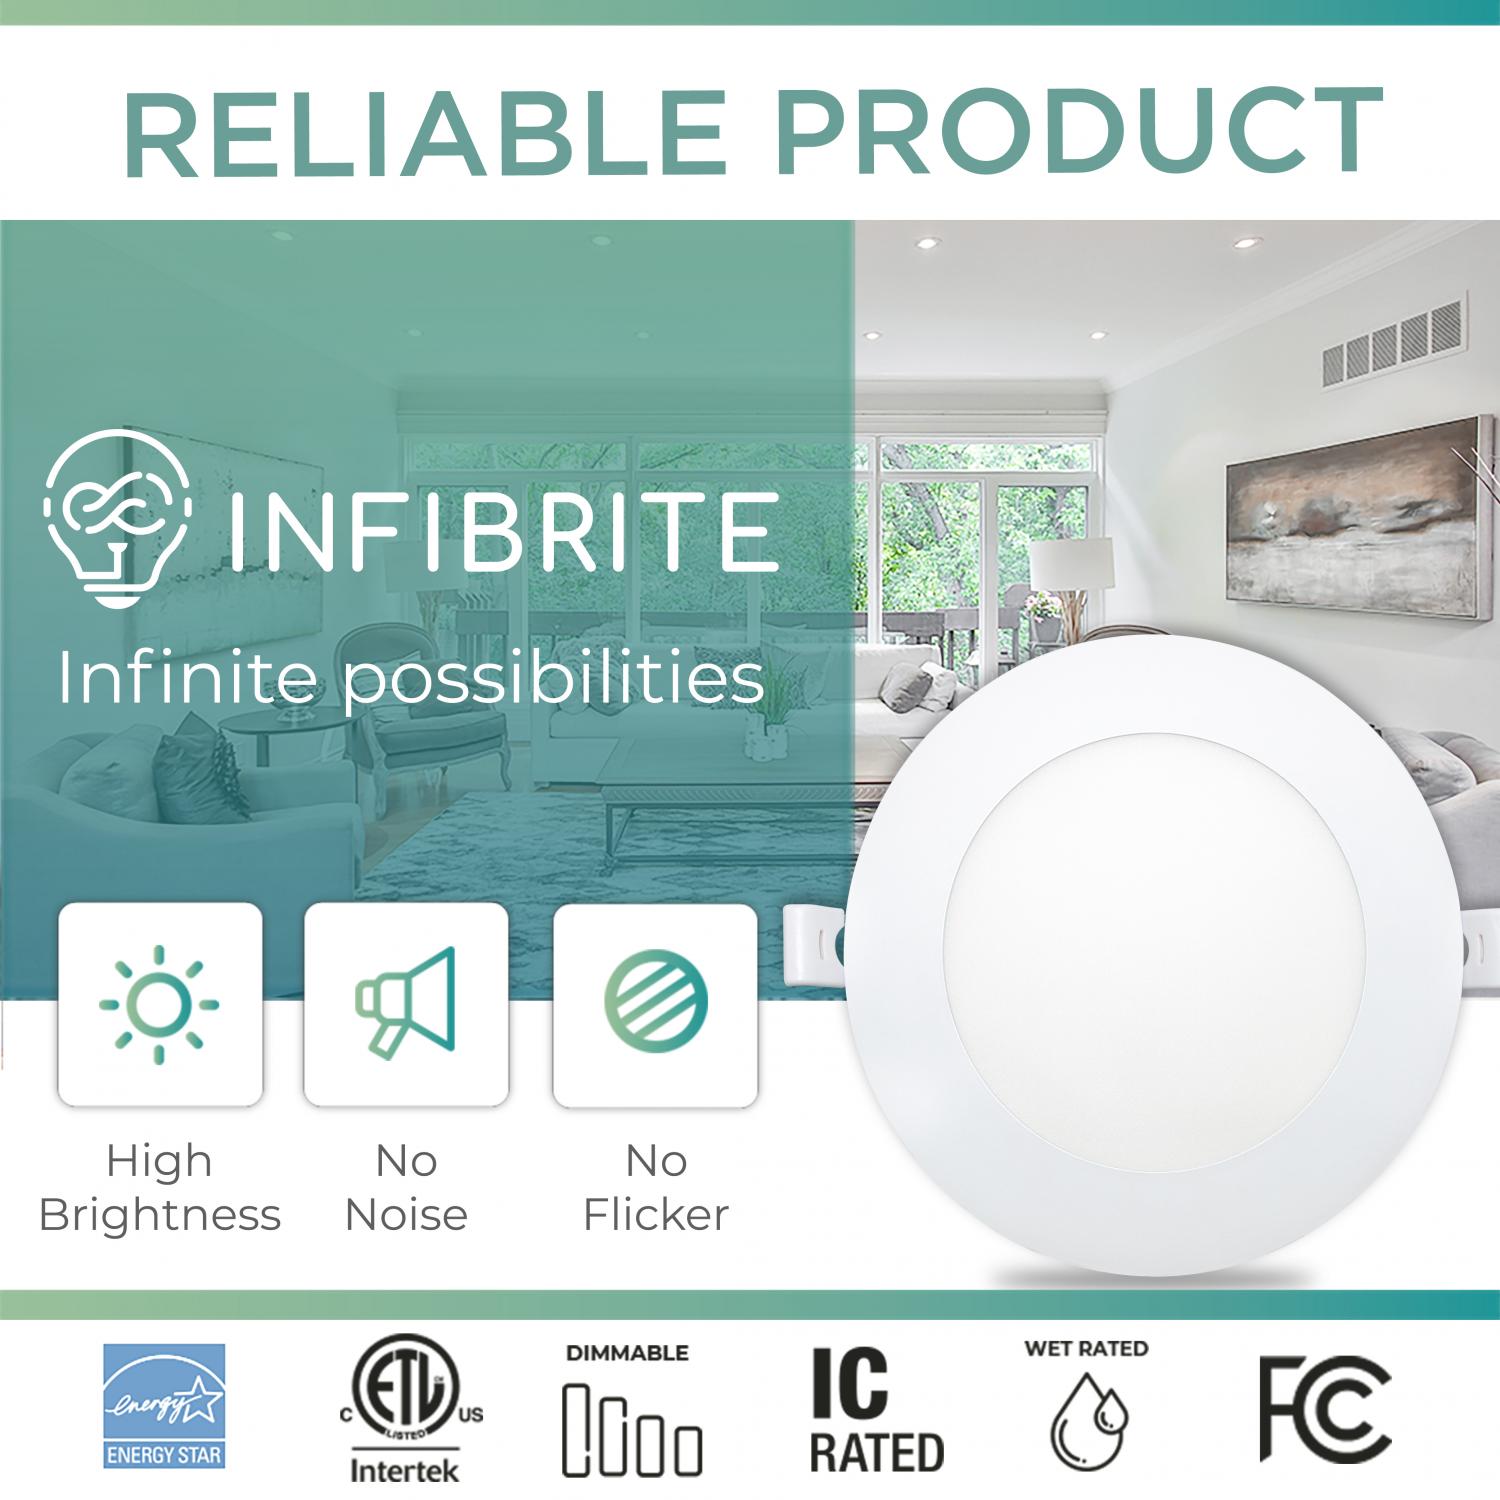 Infibrite 6 Inch 5000K Daylight 12W 1050LM Ultra-Slim LED Ceiling Light with Junction Box, Flush Mount, Dimmable, Fixture for Bedroom, Wet Rated for Bathroom, Easy Install, 110W Eqv, ETL & Energy Star, US Company (6 Pack)